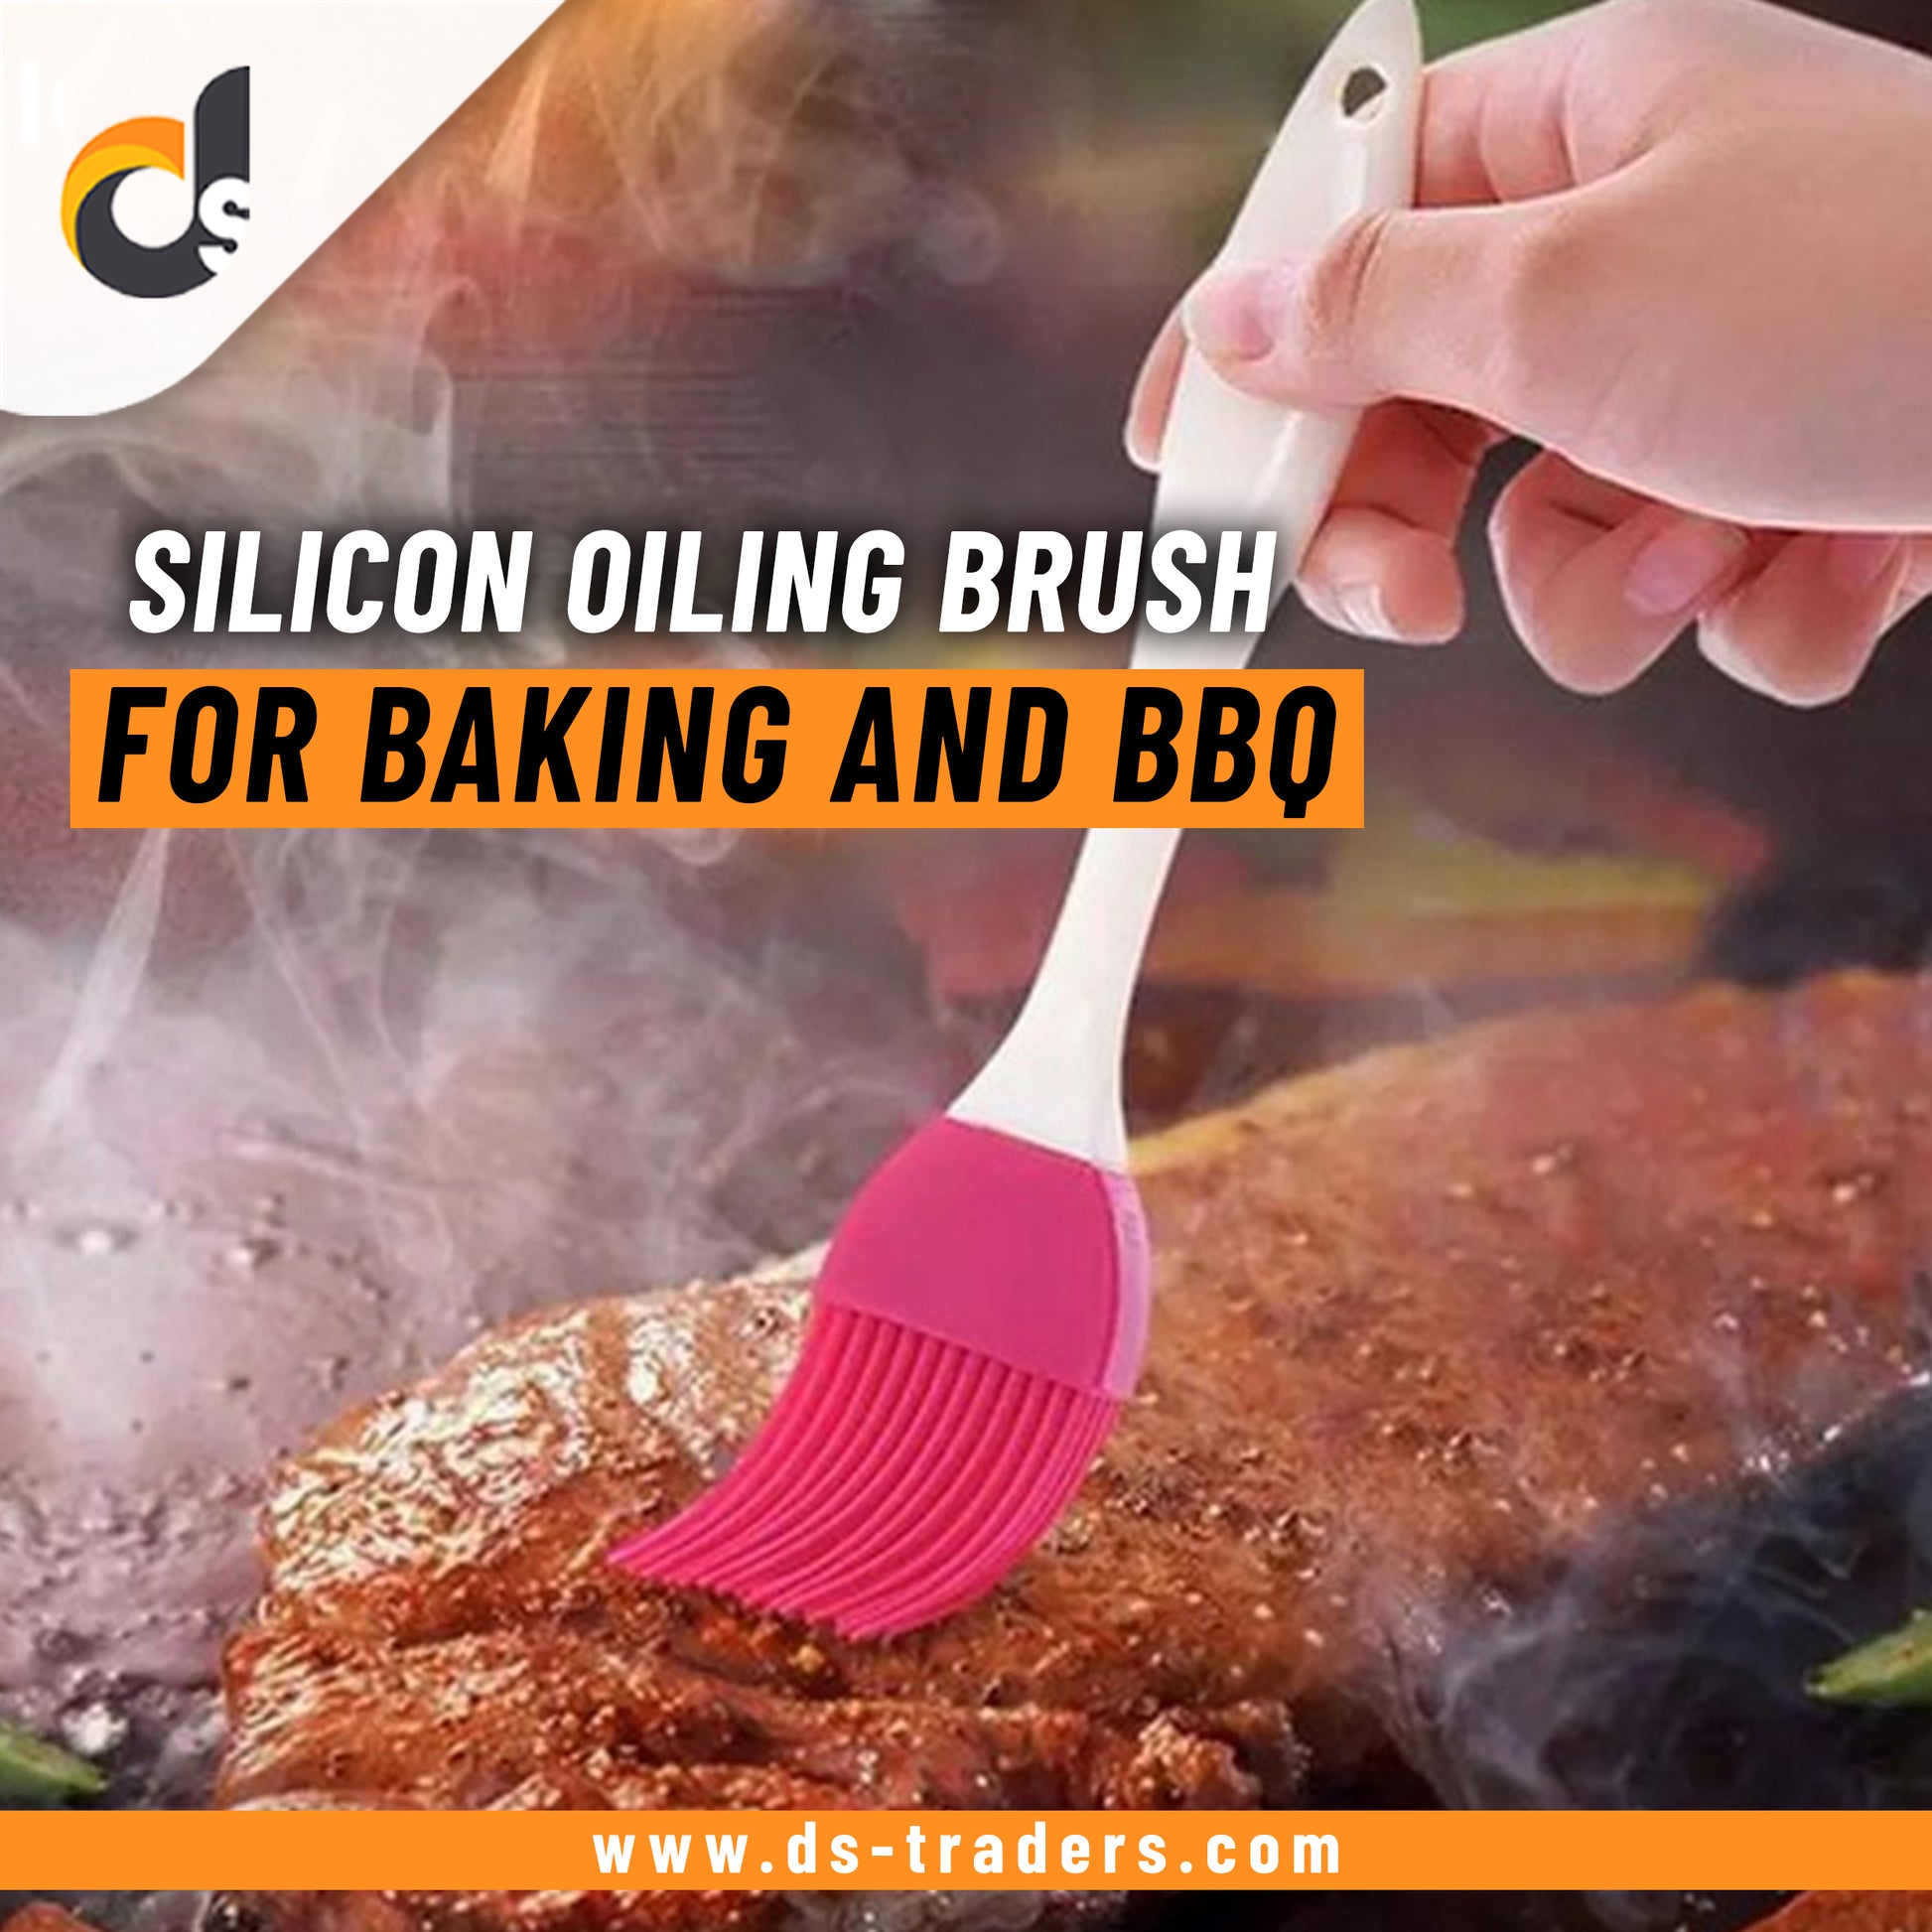 Silicon Oil Brush For Baking and Bbq